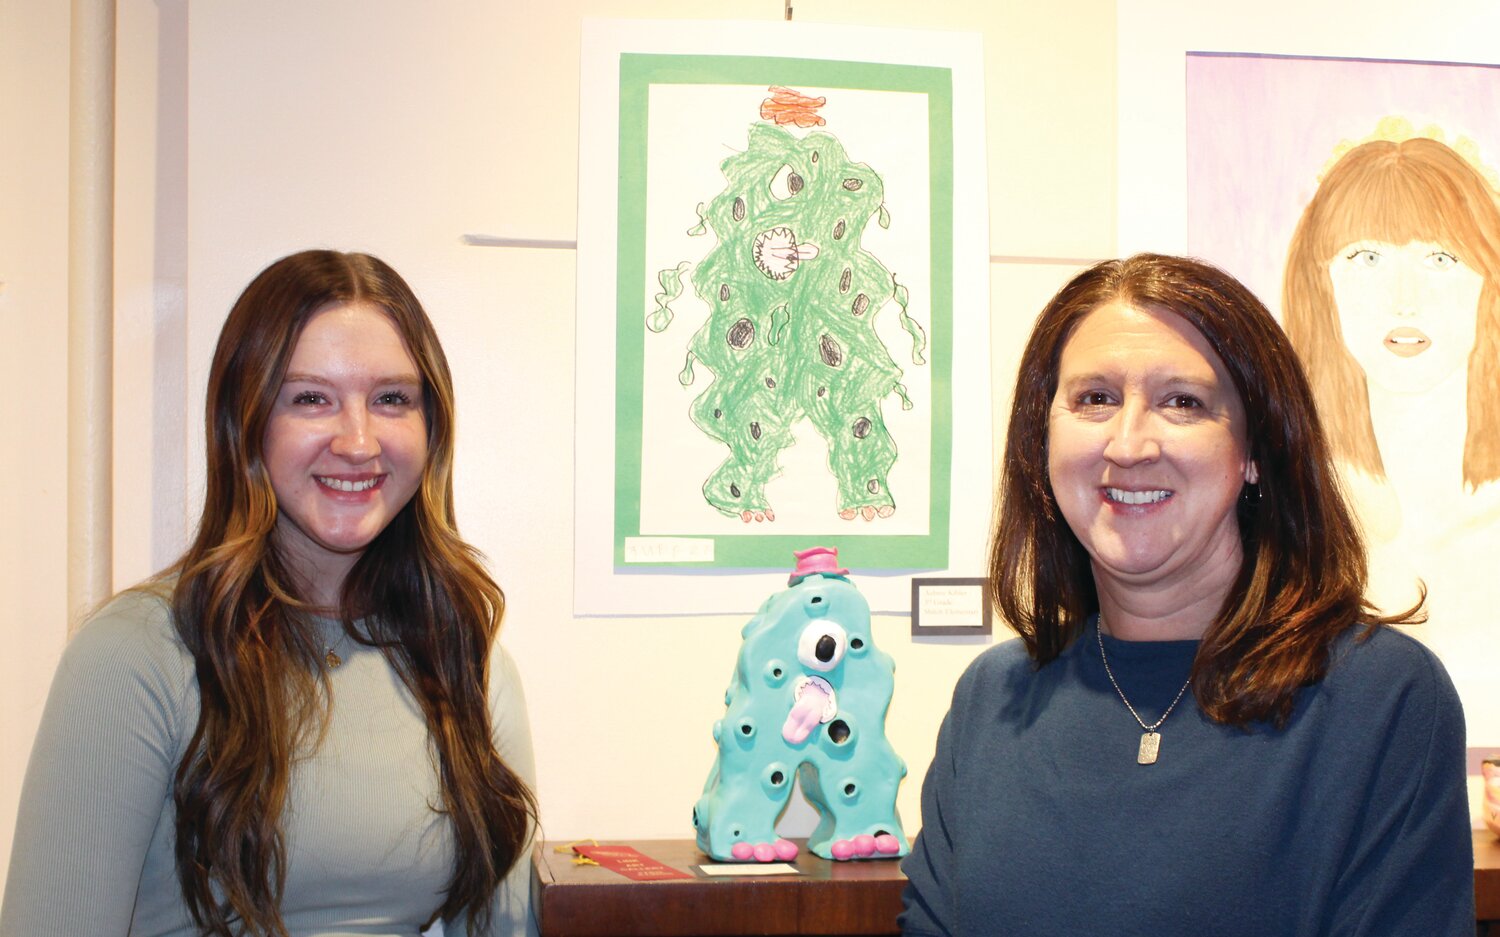 Mollie Pollock, left, received second place in the three-dimensional category in the Edgar County Student Art Show at the Link Art Gallery. Her sculpture “Blobby Monster” is in the background and based on the drawing above it created by a Shiloh elementary student. Randi Pollock, right, is Shiloh’s art teacher and her long-time practice is partnering younger students with high school artists to collaborate on projects.